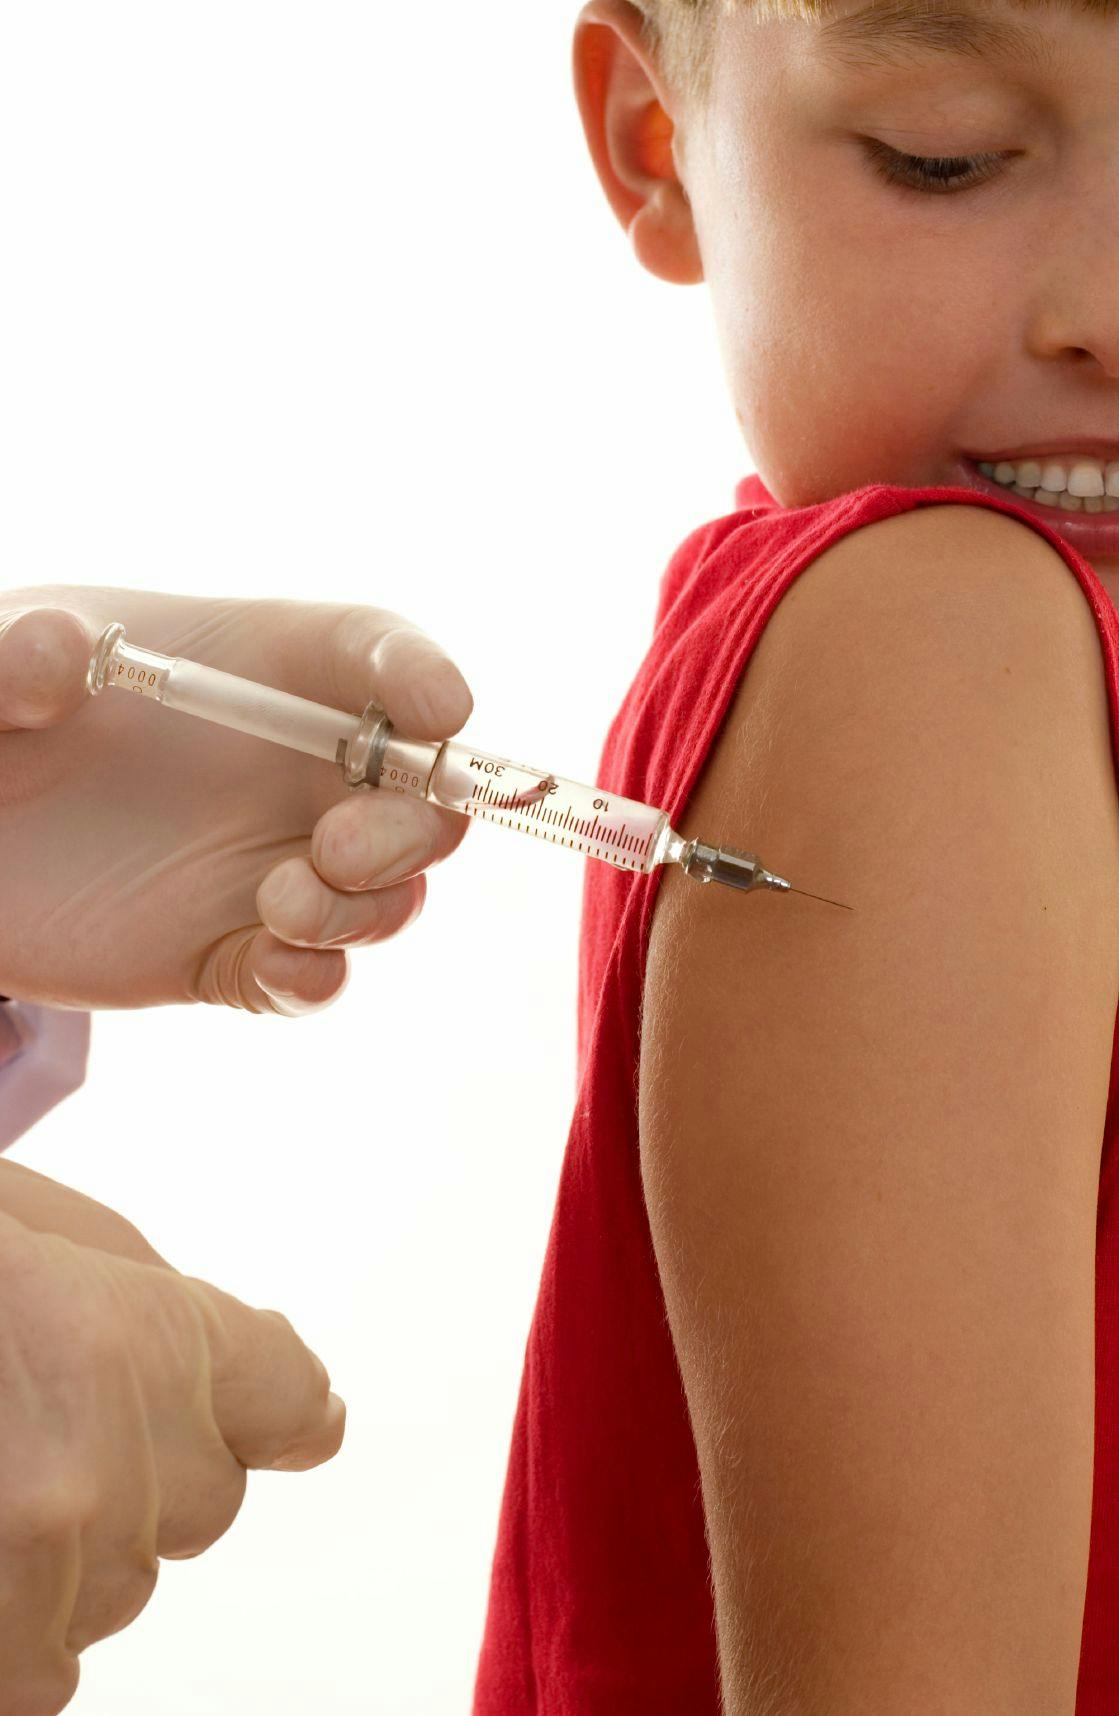 Stay Up-to-Date on COVID-19 Vaccines for Children, Teens